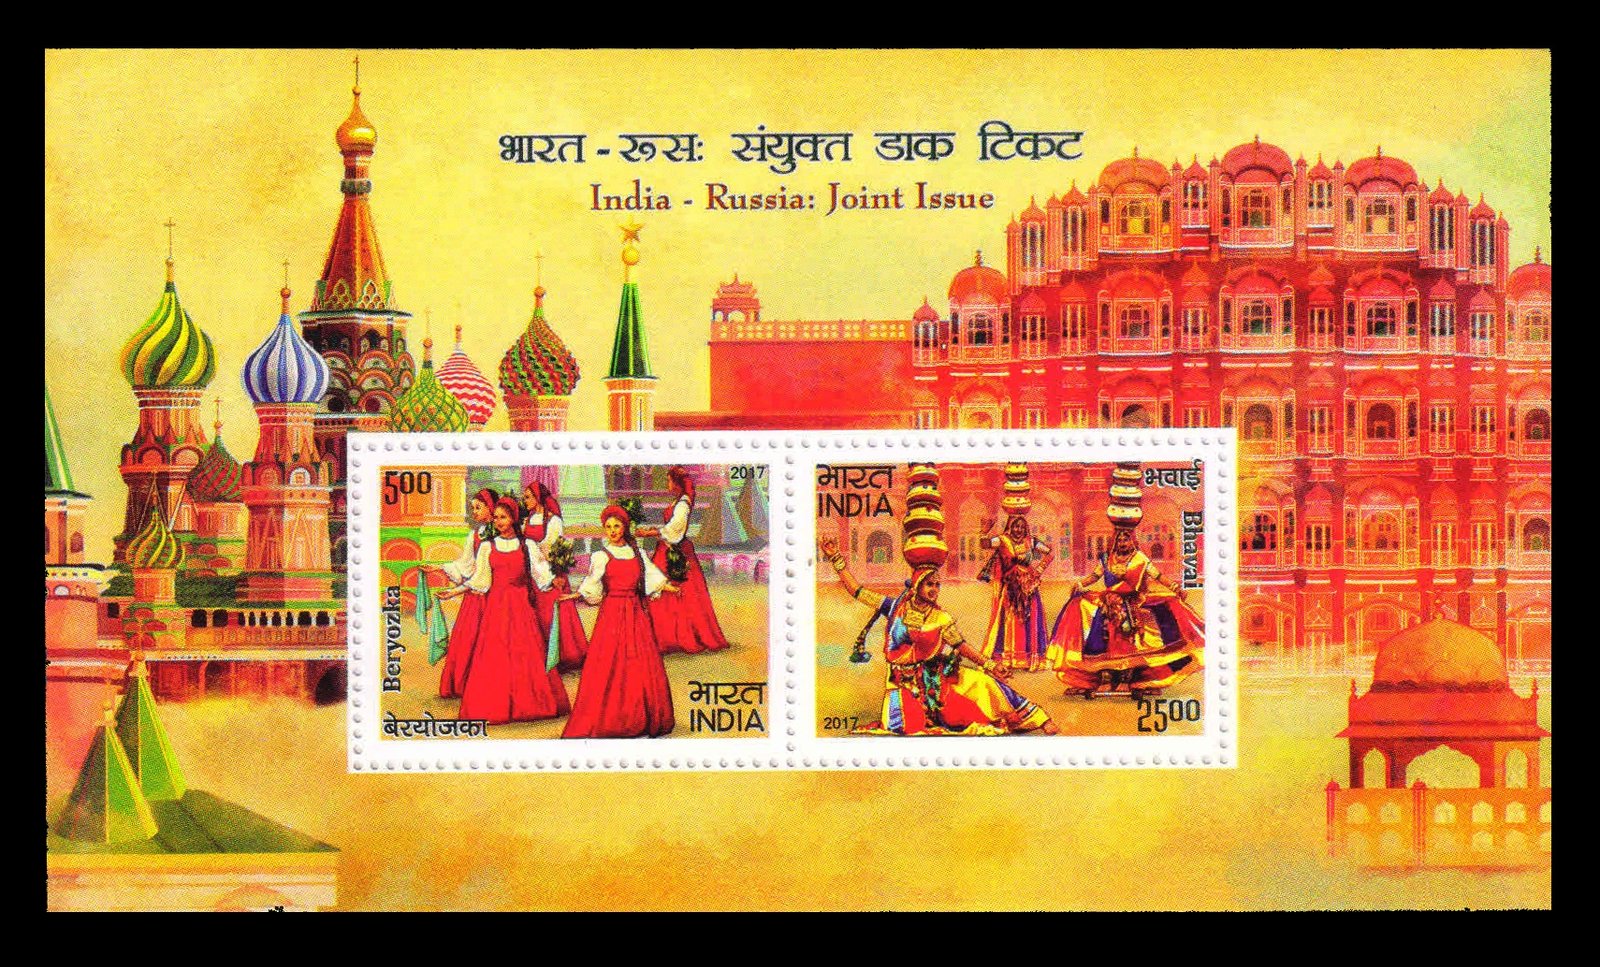 INDIA 2017 - India Russia Joint Issue, Folk Dance, Miniature Sheet of 2 Stamps, MNH